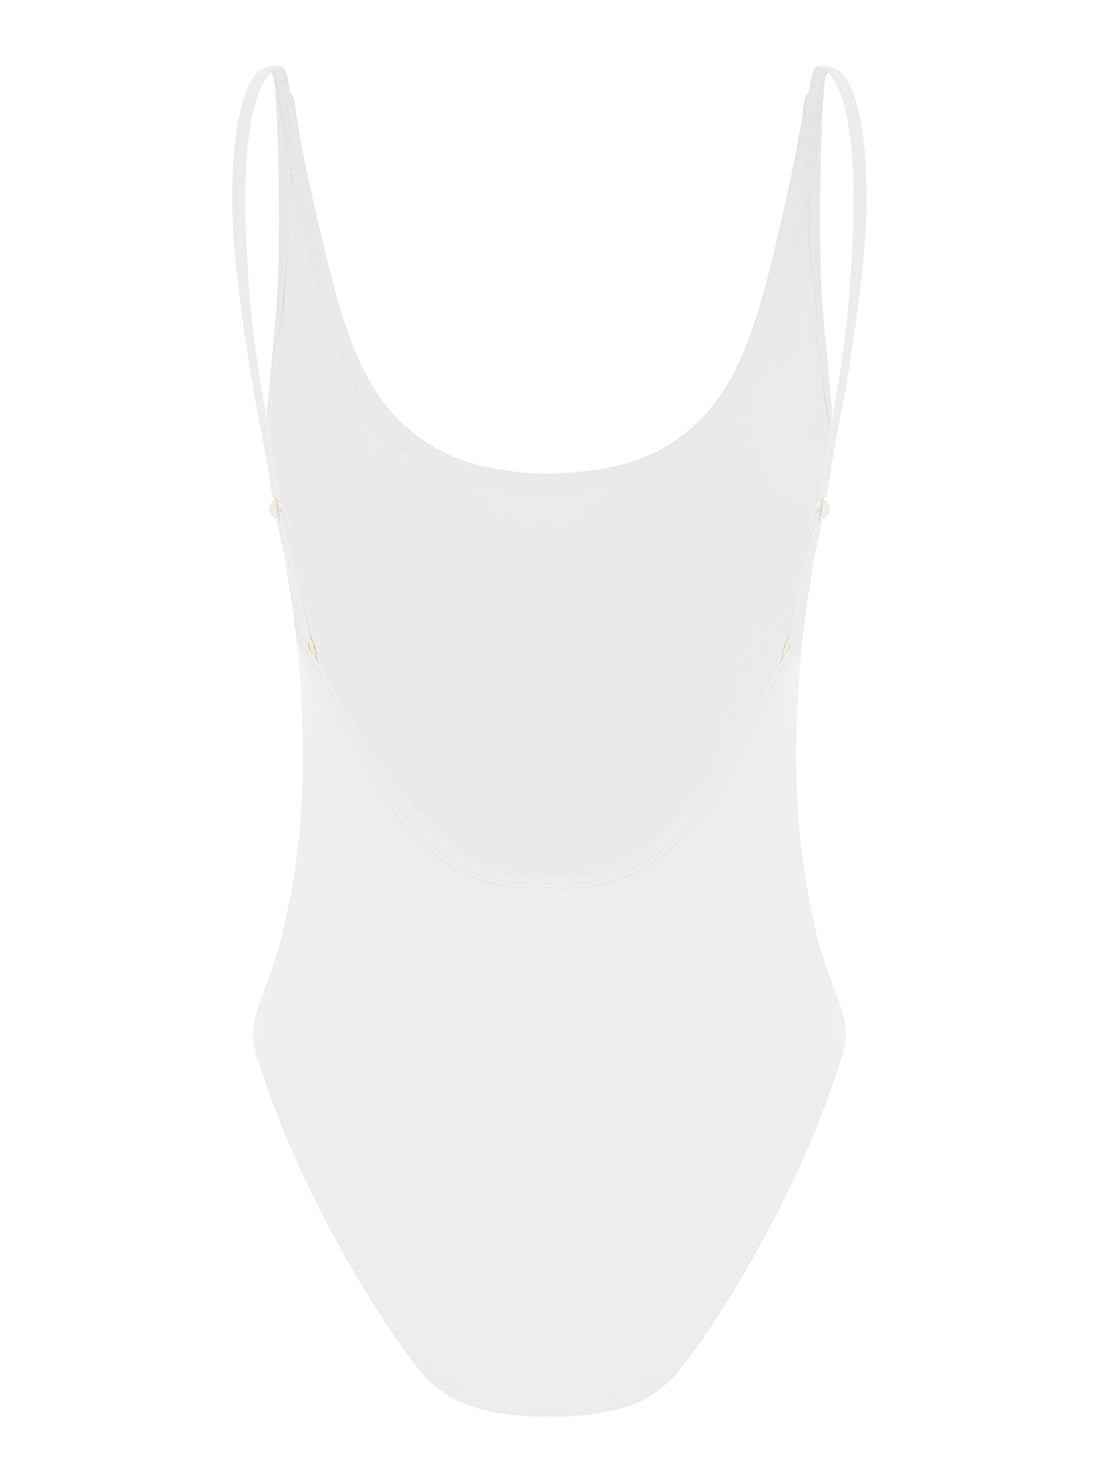 GUESS Women's Positano White Palm Logo One-Piece Swimsuit E2GJ10LY00K Ghost Back View